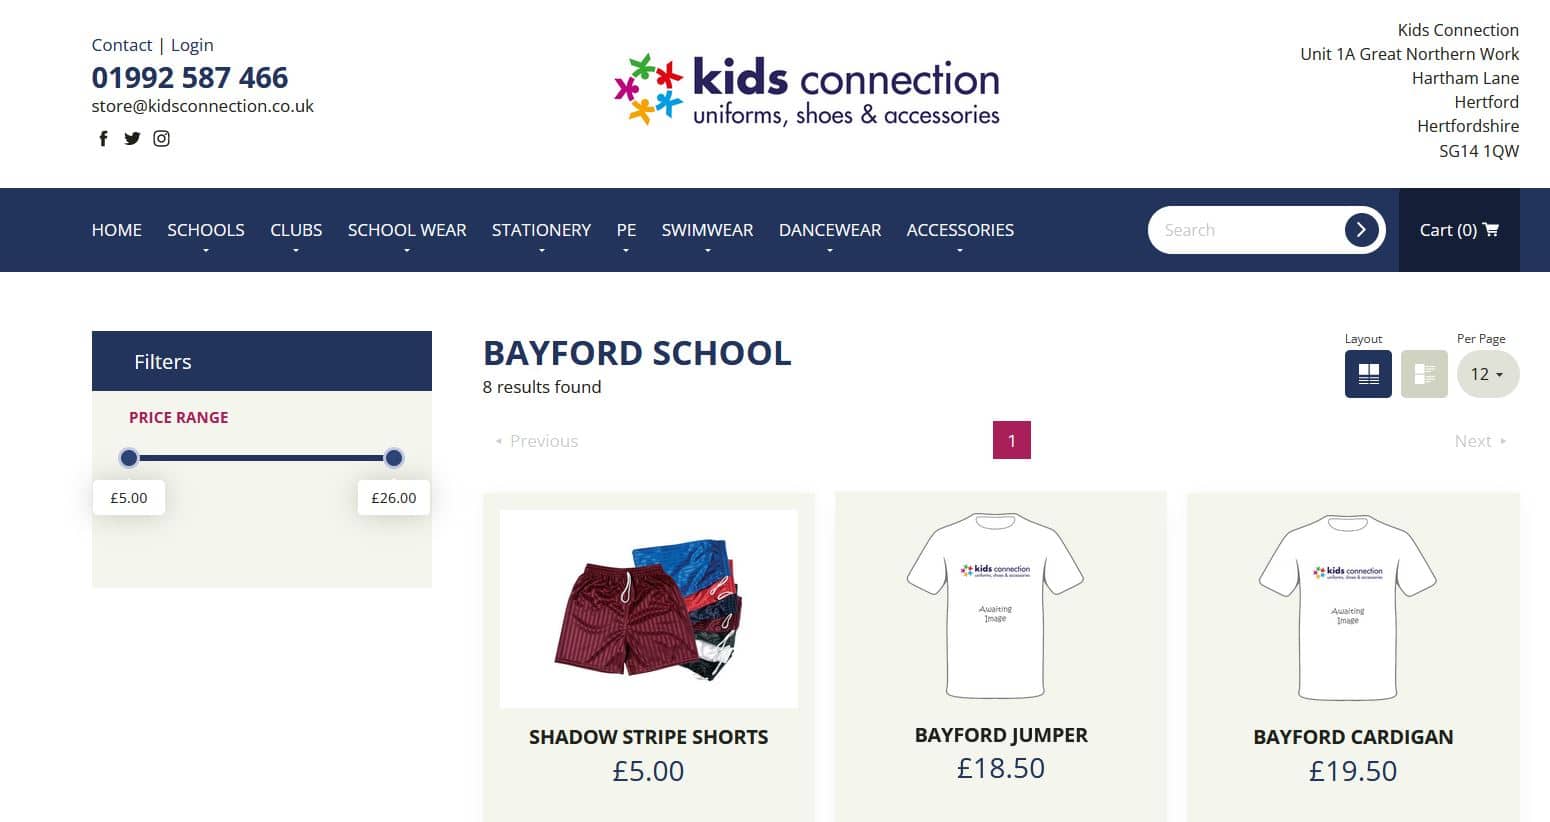 snapshot image from the website of our current uniform supplier